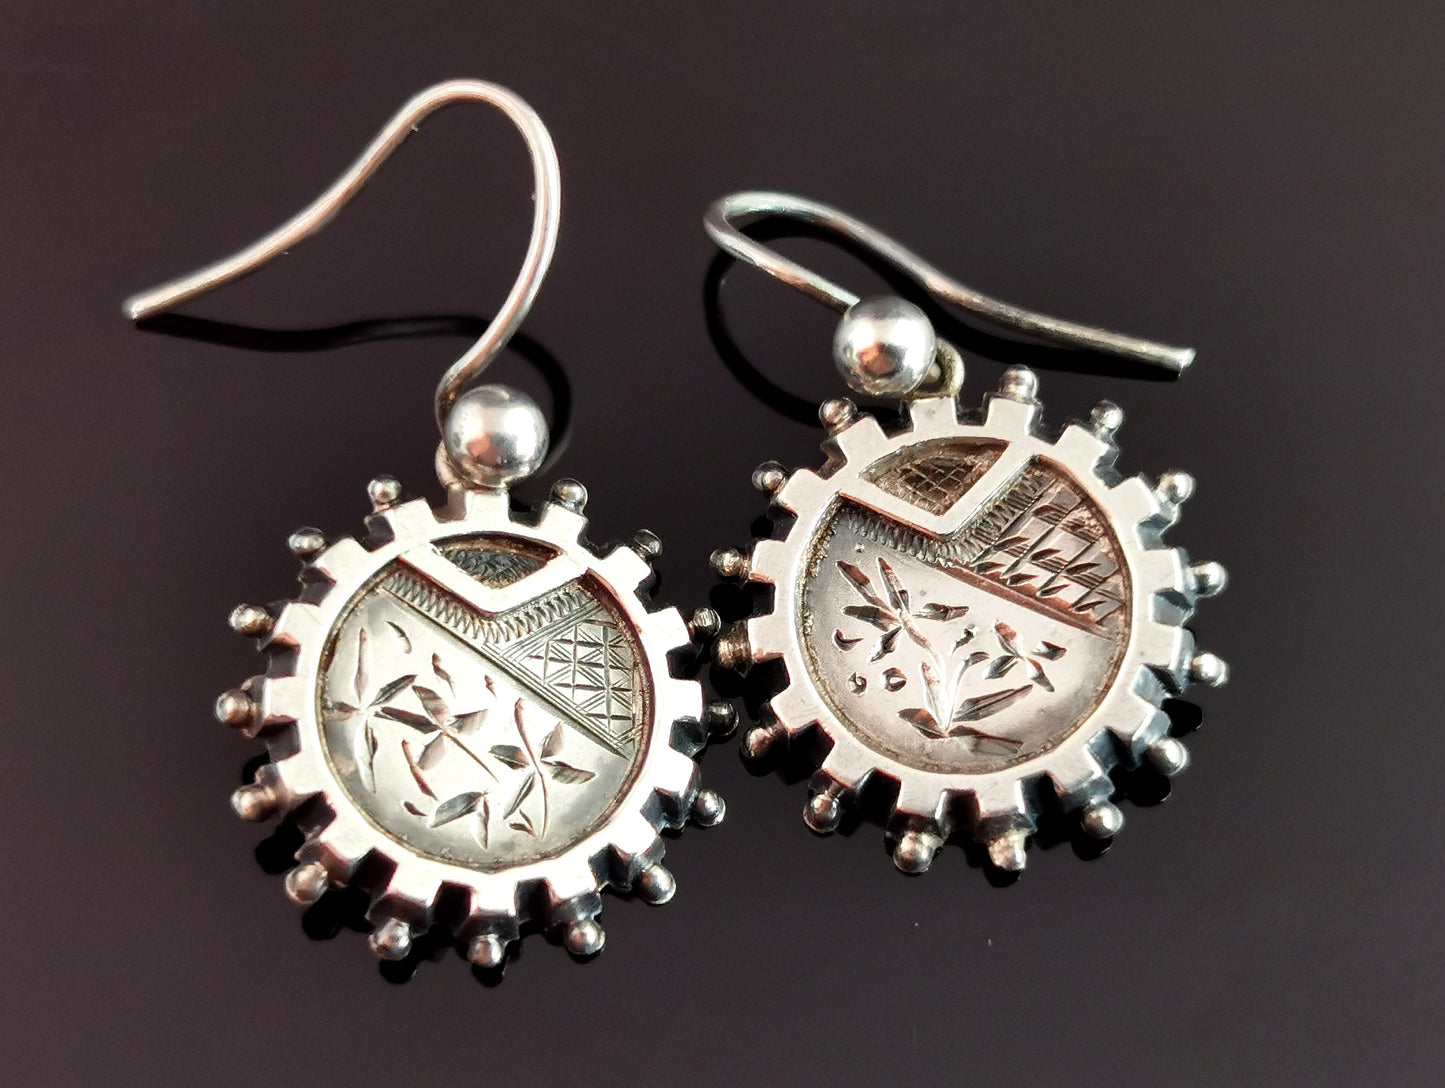 Antique Victorian silver aesthetic earrings, dangly